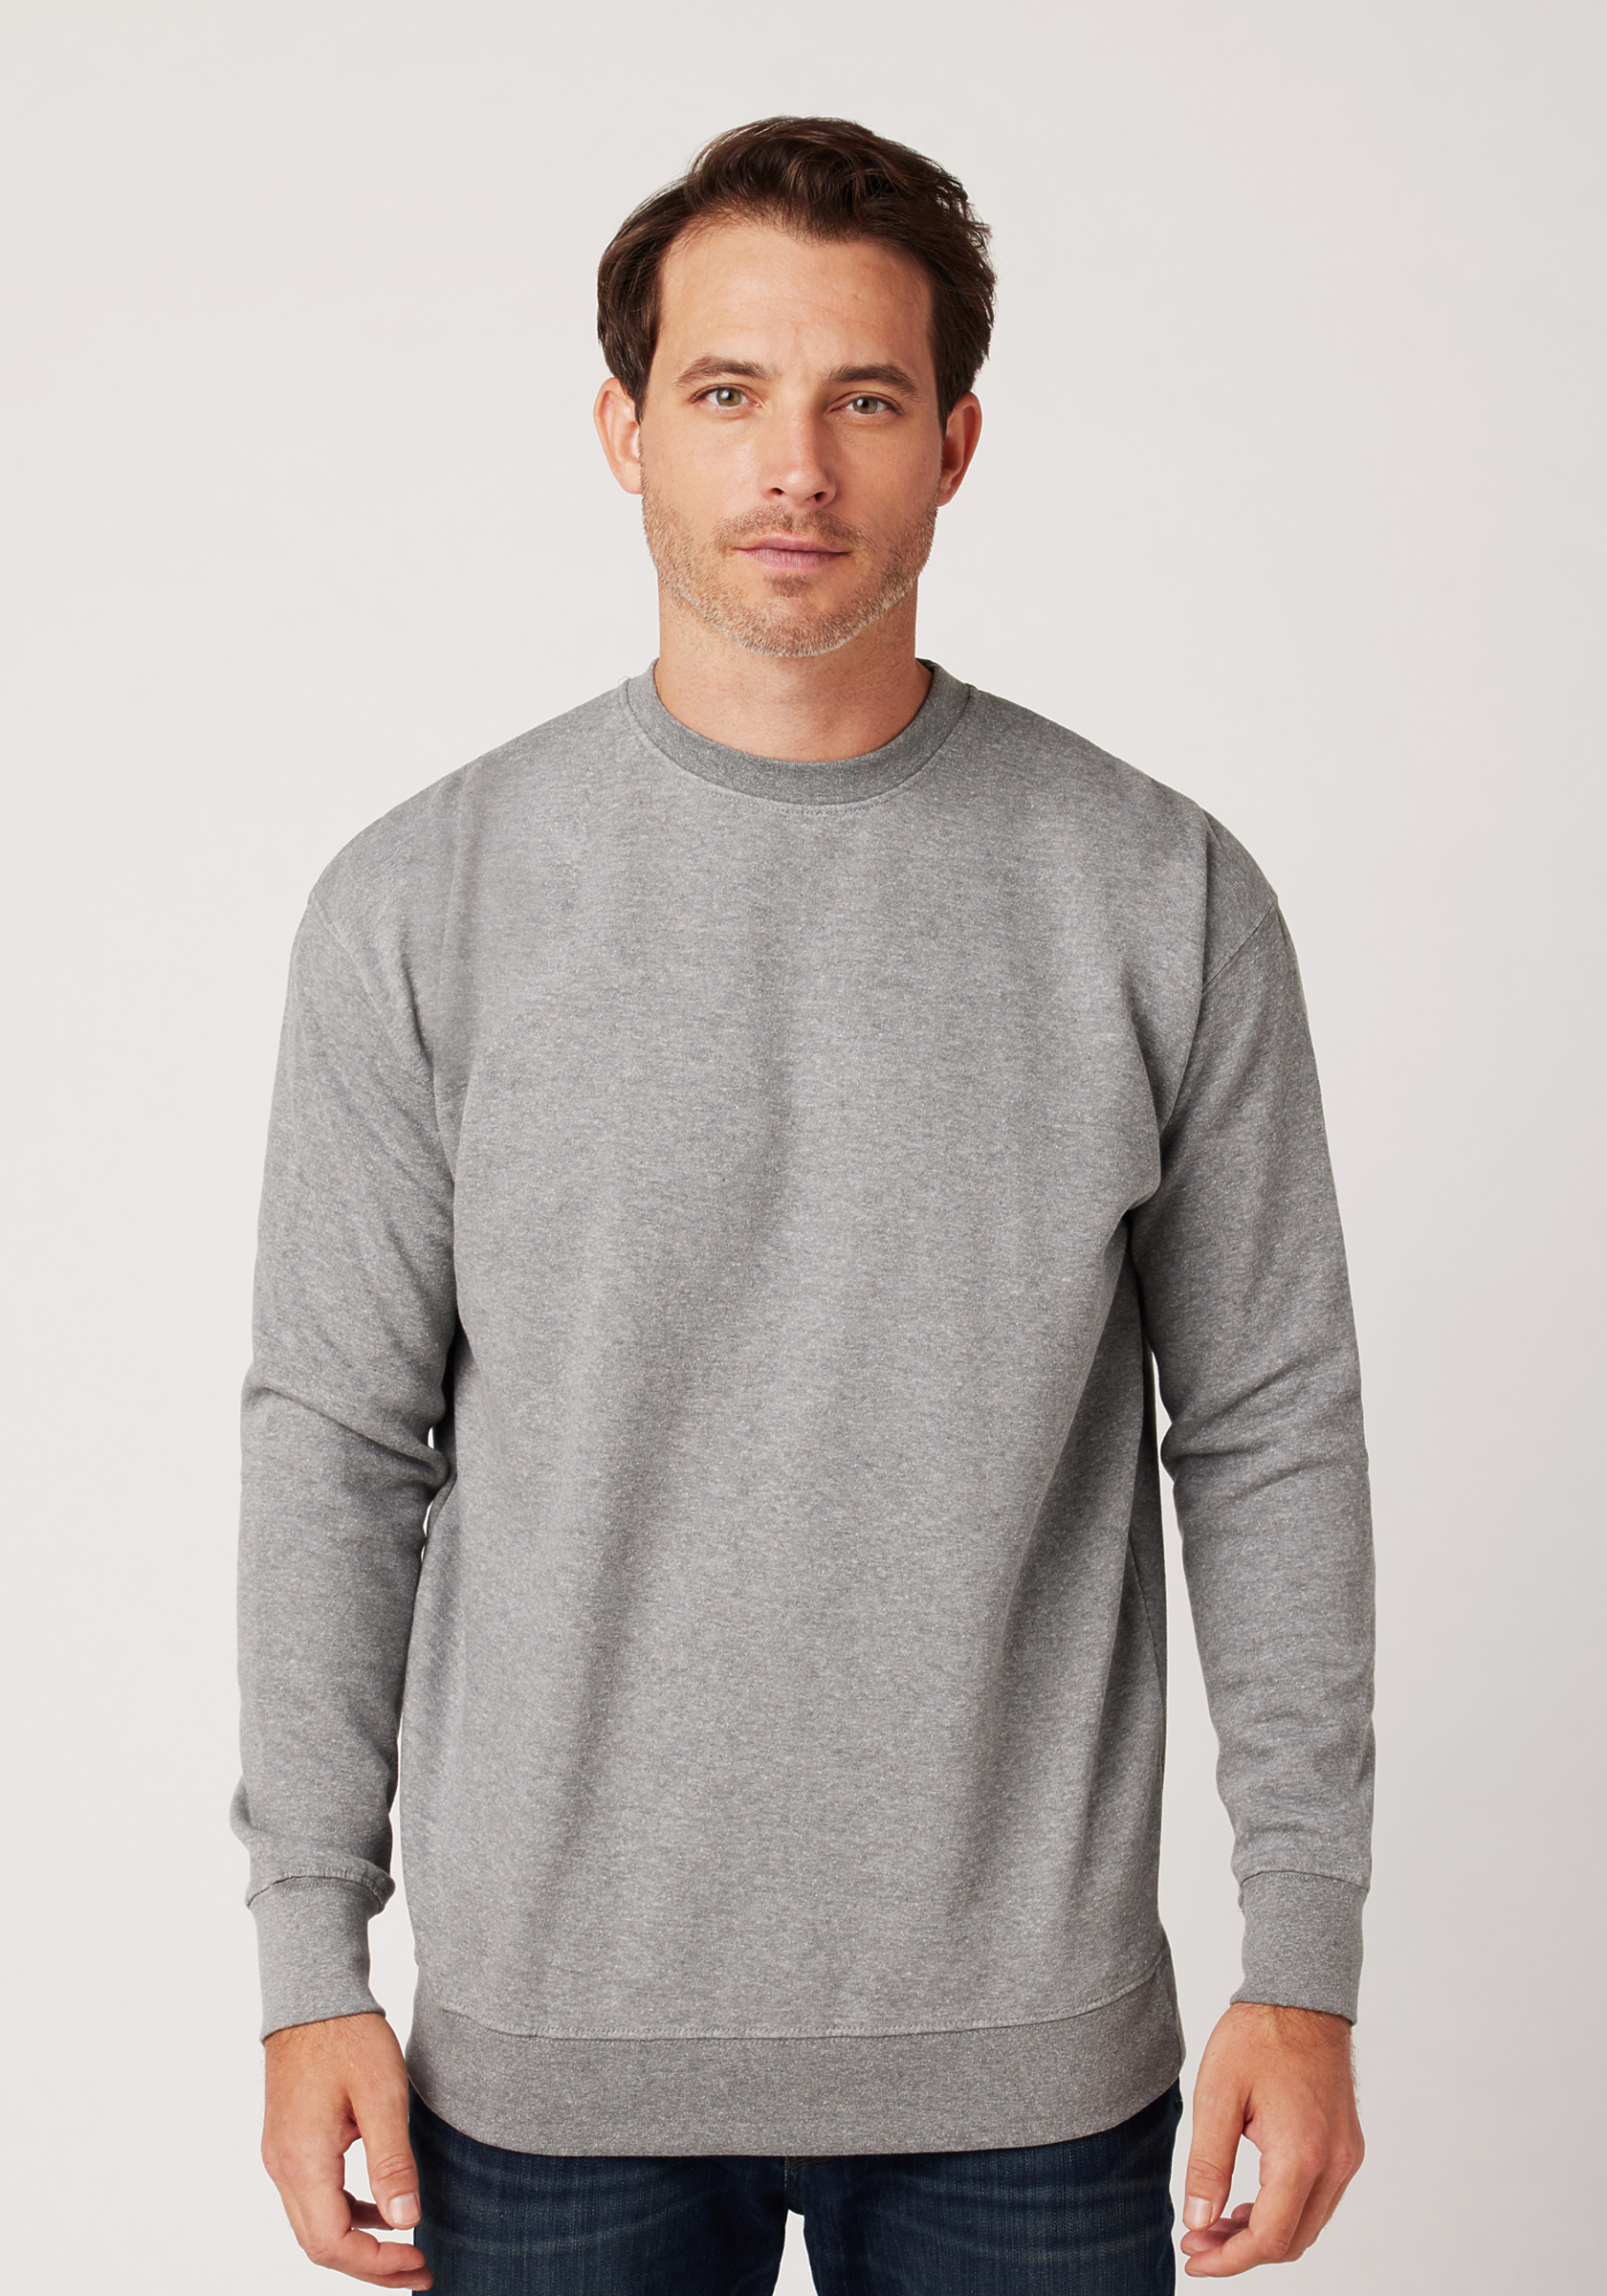 Men's Crew Neck Jumper from Crew Clothing Company